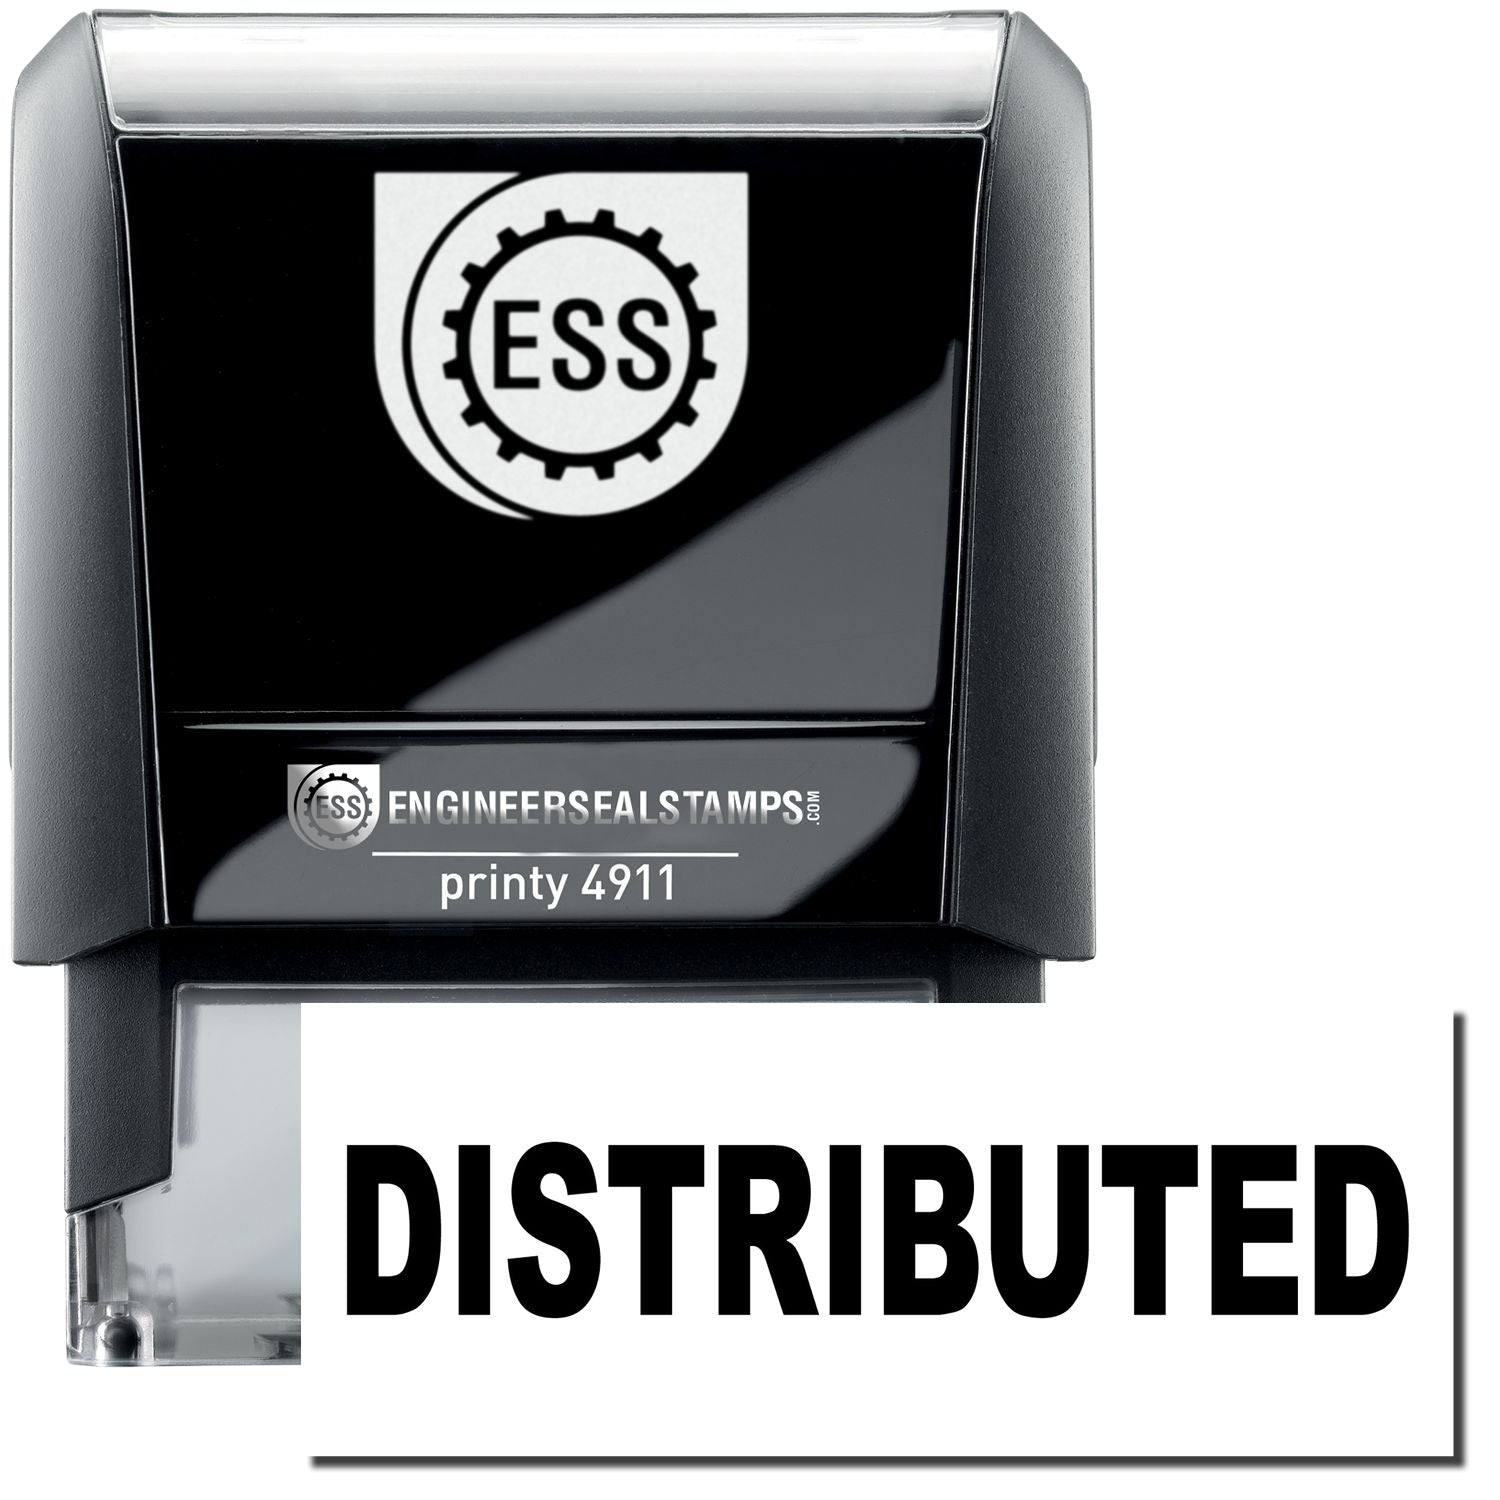 A self-inking stamp with a stamped image showing how the text "DISTRIBUTED" is displayed after stamping.